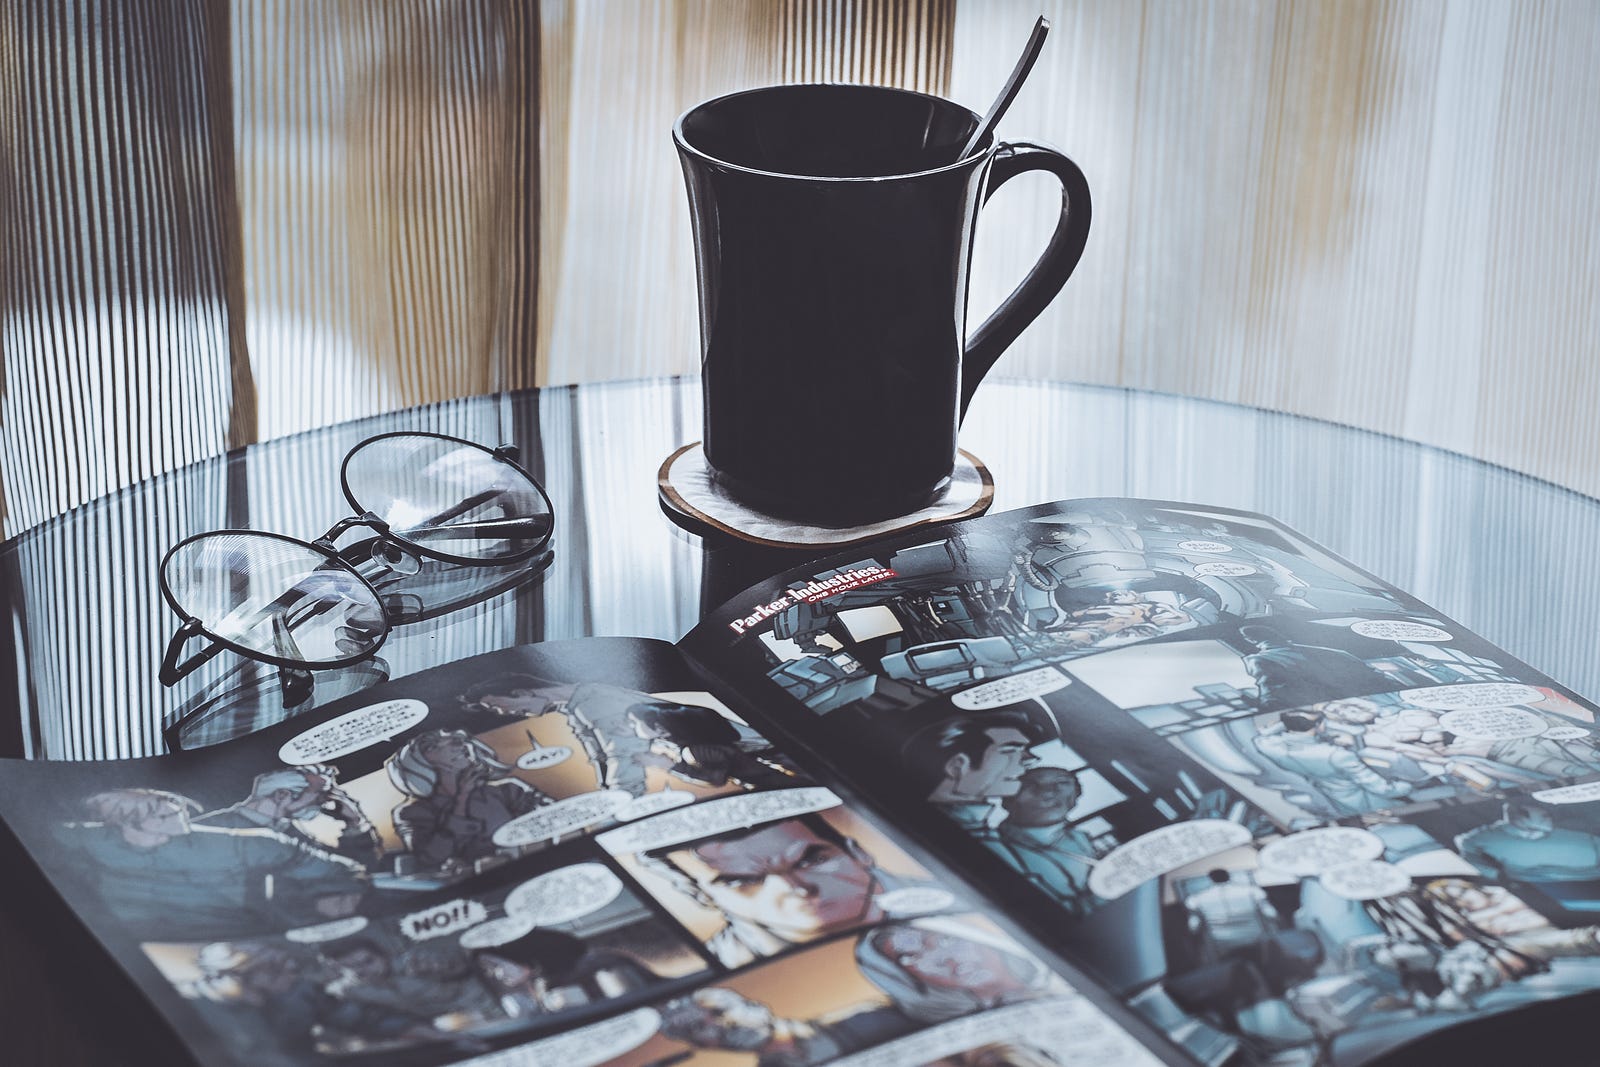 A photo of glasses, a mug of coffee, and a comic book and a table.